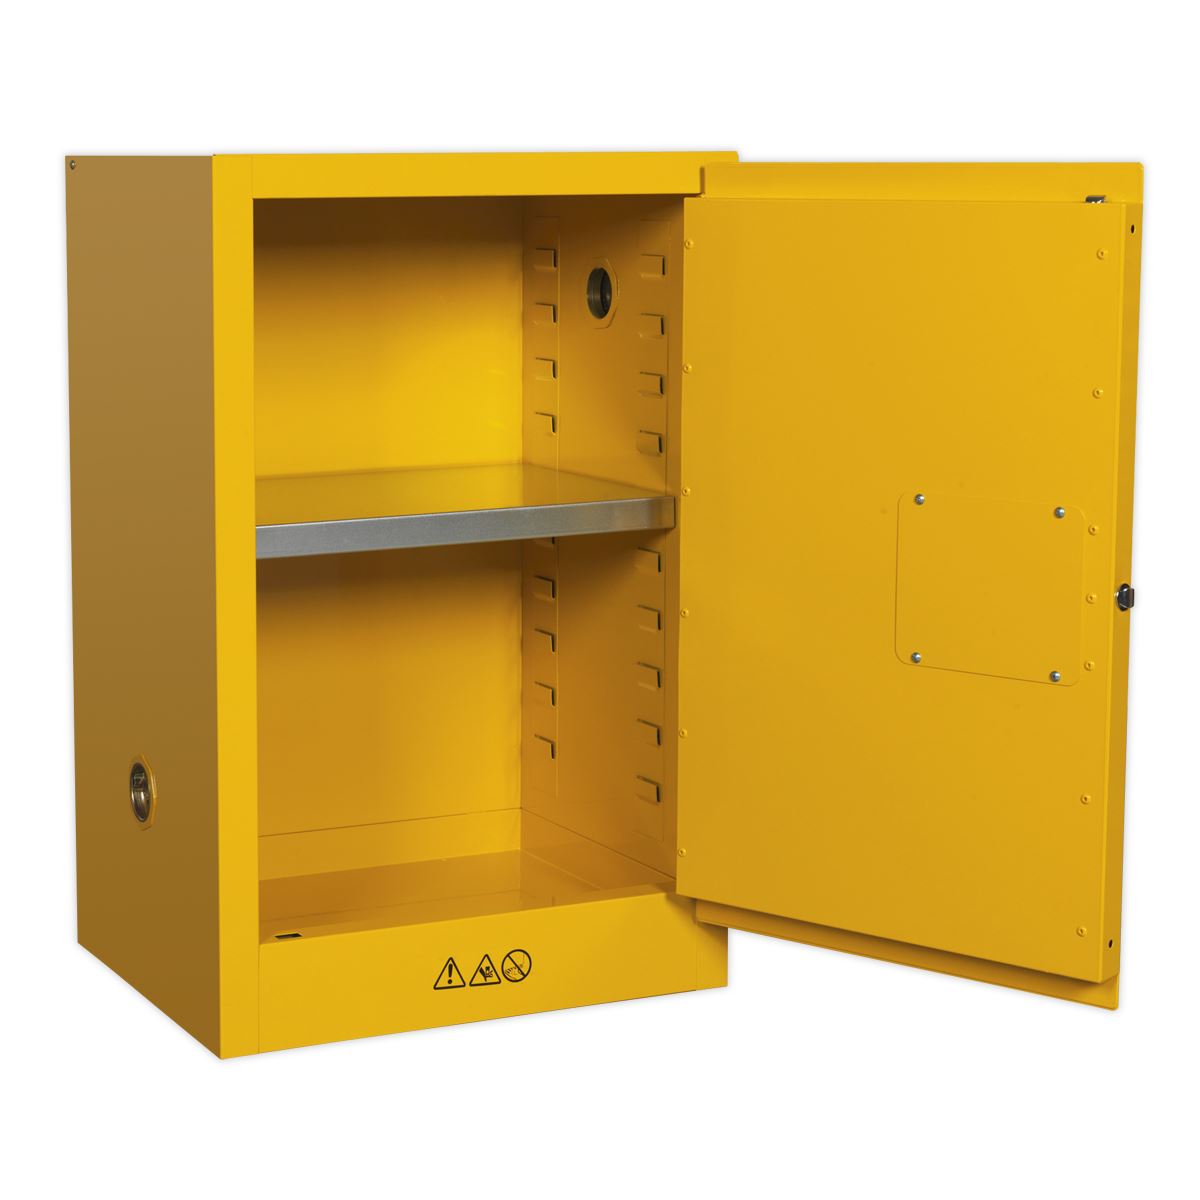 Sealey Flammables Storage Cabinet 585 x 455 x 890mm